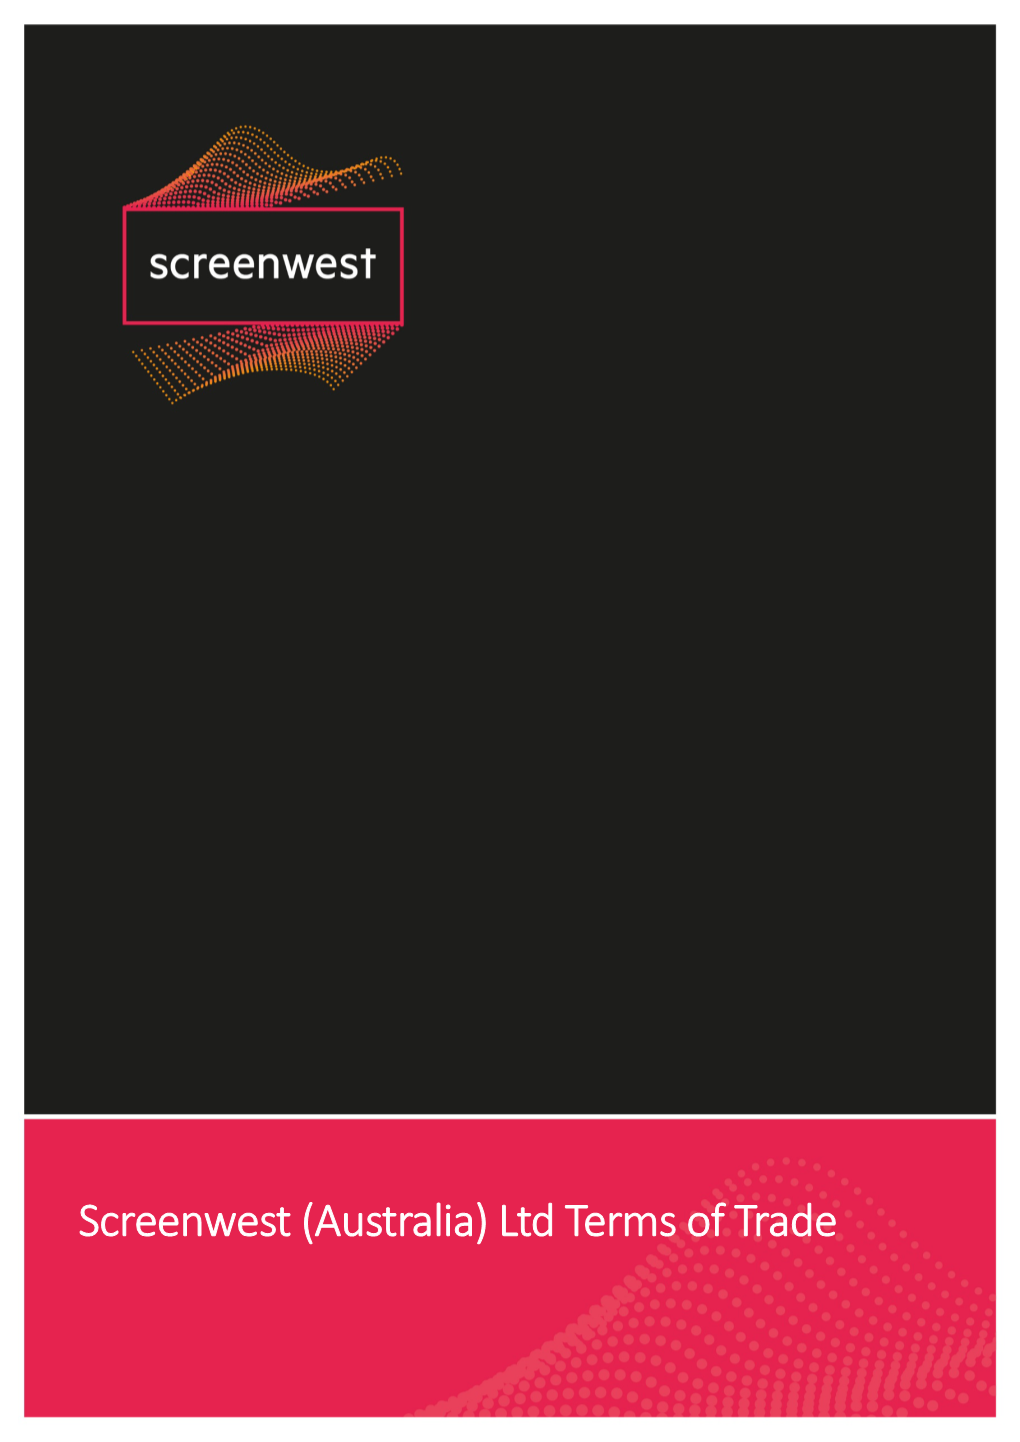 Screenwest Terms of Trade Apply to All Screenwest Funding and Support Programs and Provide Guidance on How Screenwest Will Transact Its Business